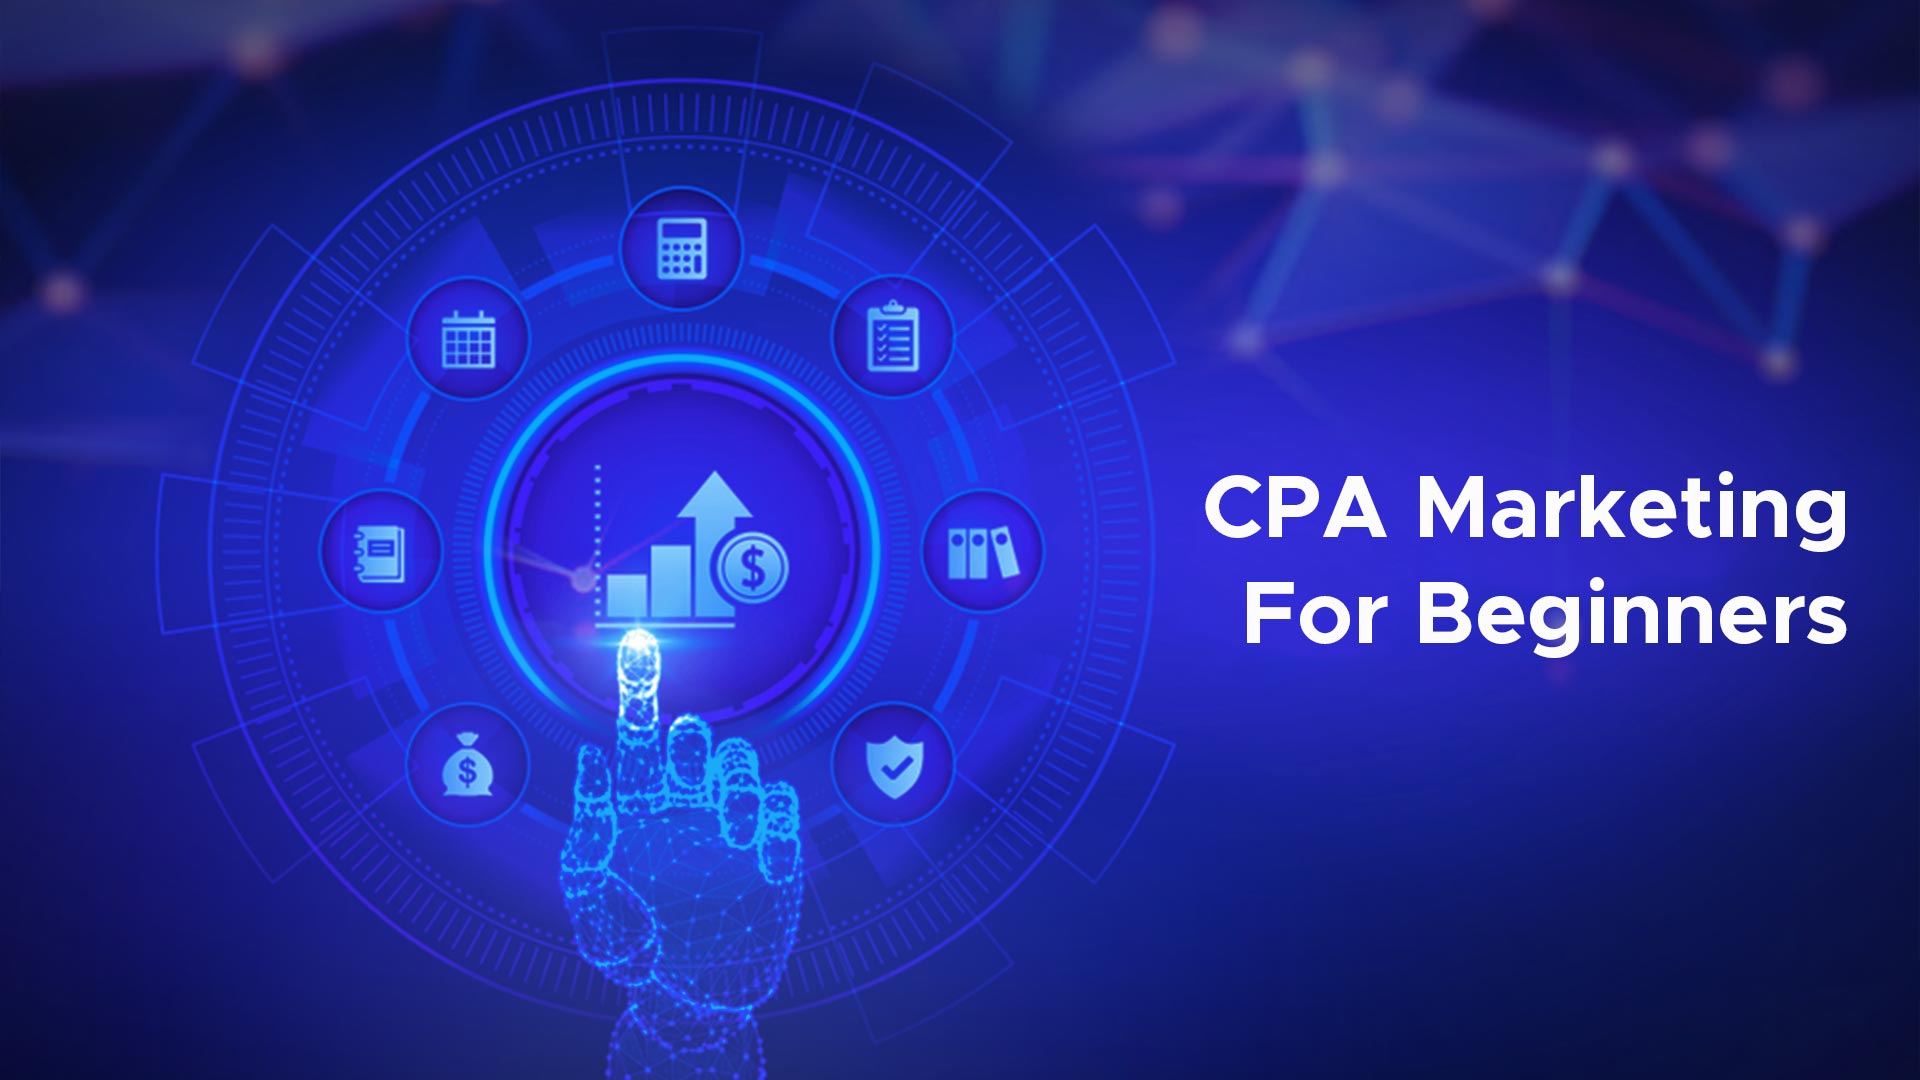 CPA Marketing for Beginners by AdNetwork